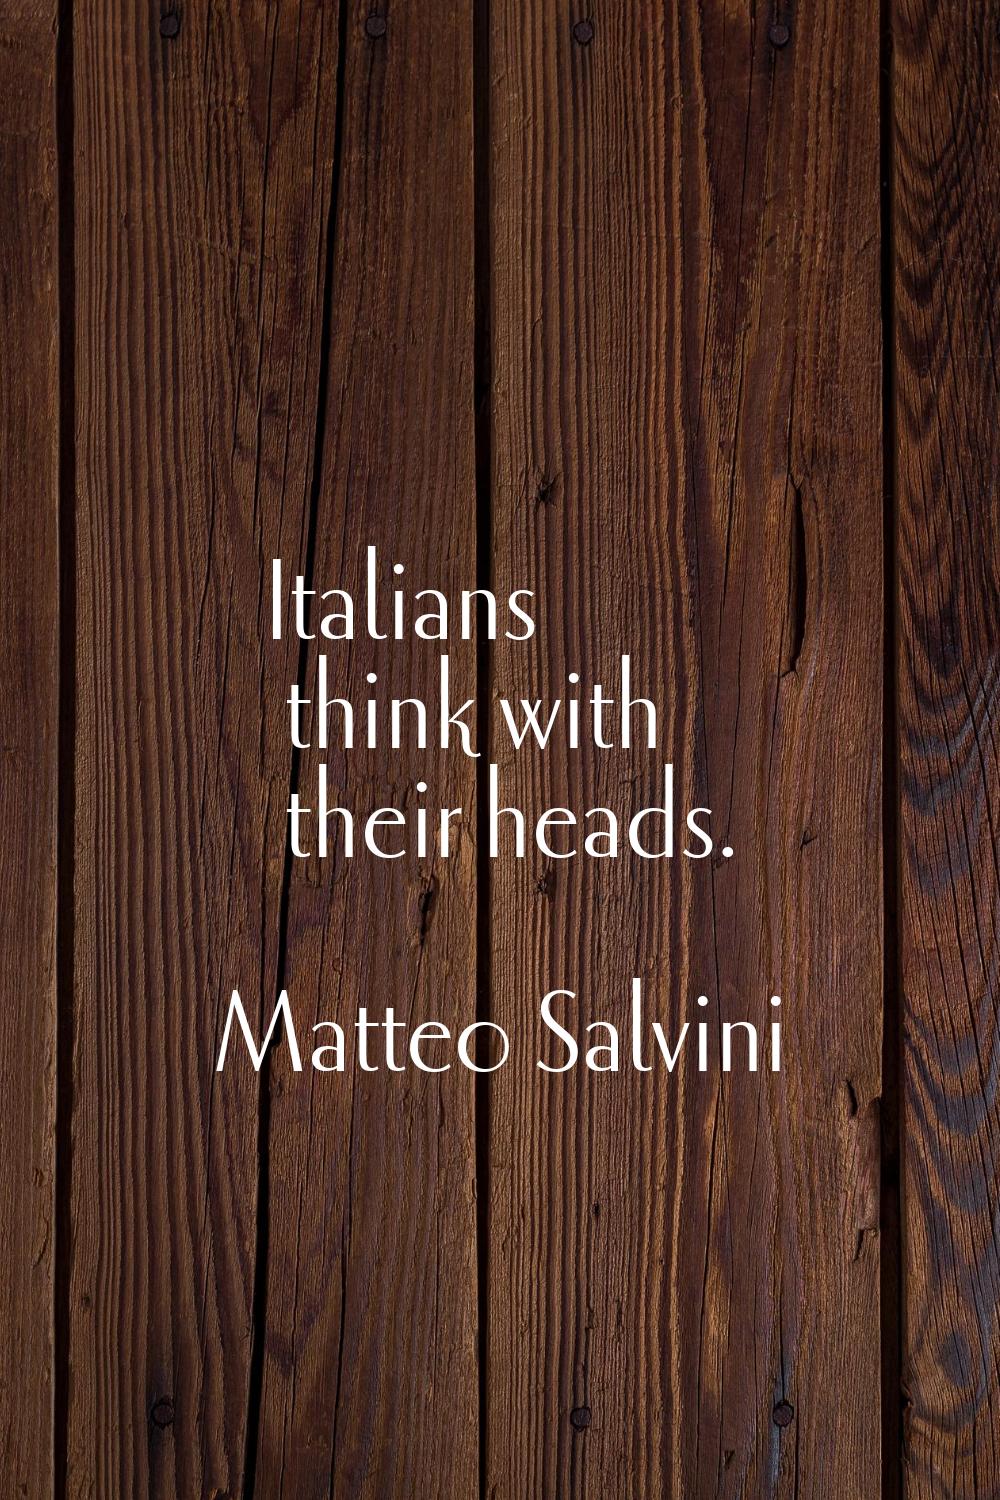 Italians think with their heads.